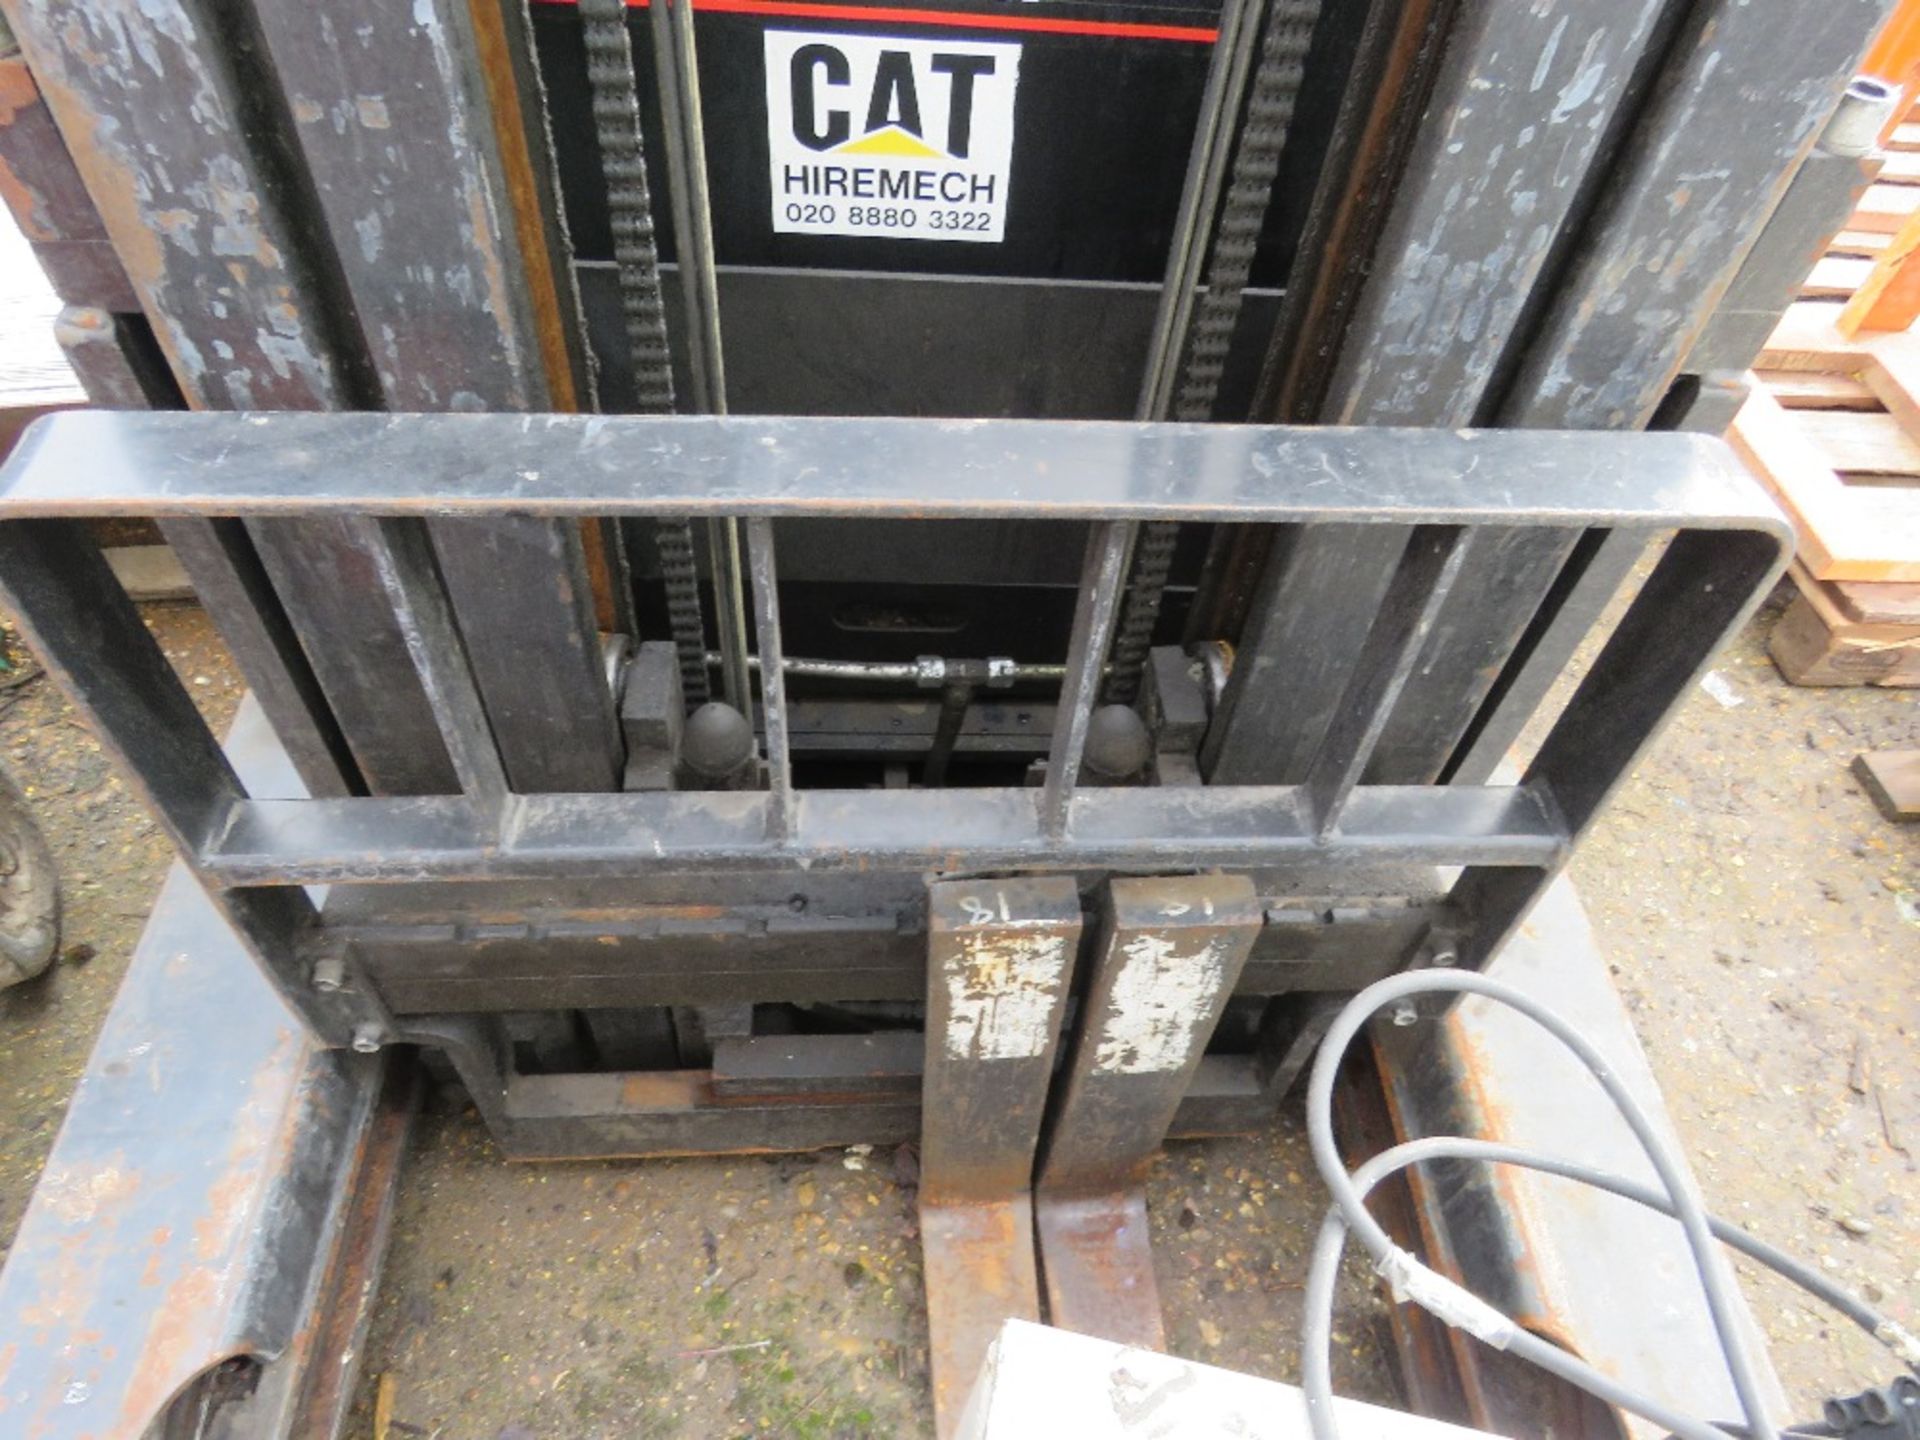 CAT BATTERY POWERED REACH TRUCK WITH CHARGER, DIRECT FROM COMPANY LIQUIDATION. SEEN TO LIFT AND LOW - Image 5 of 9